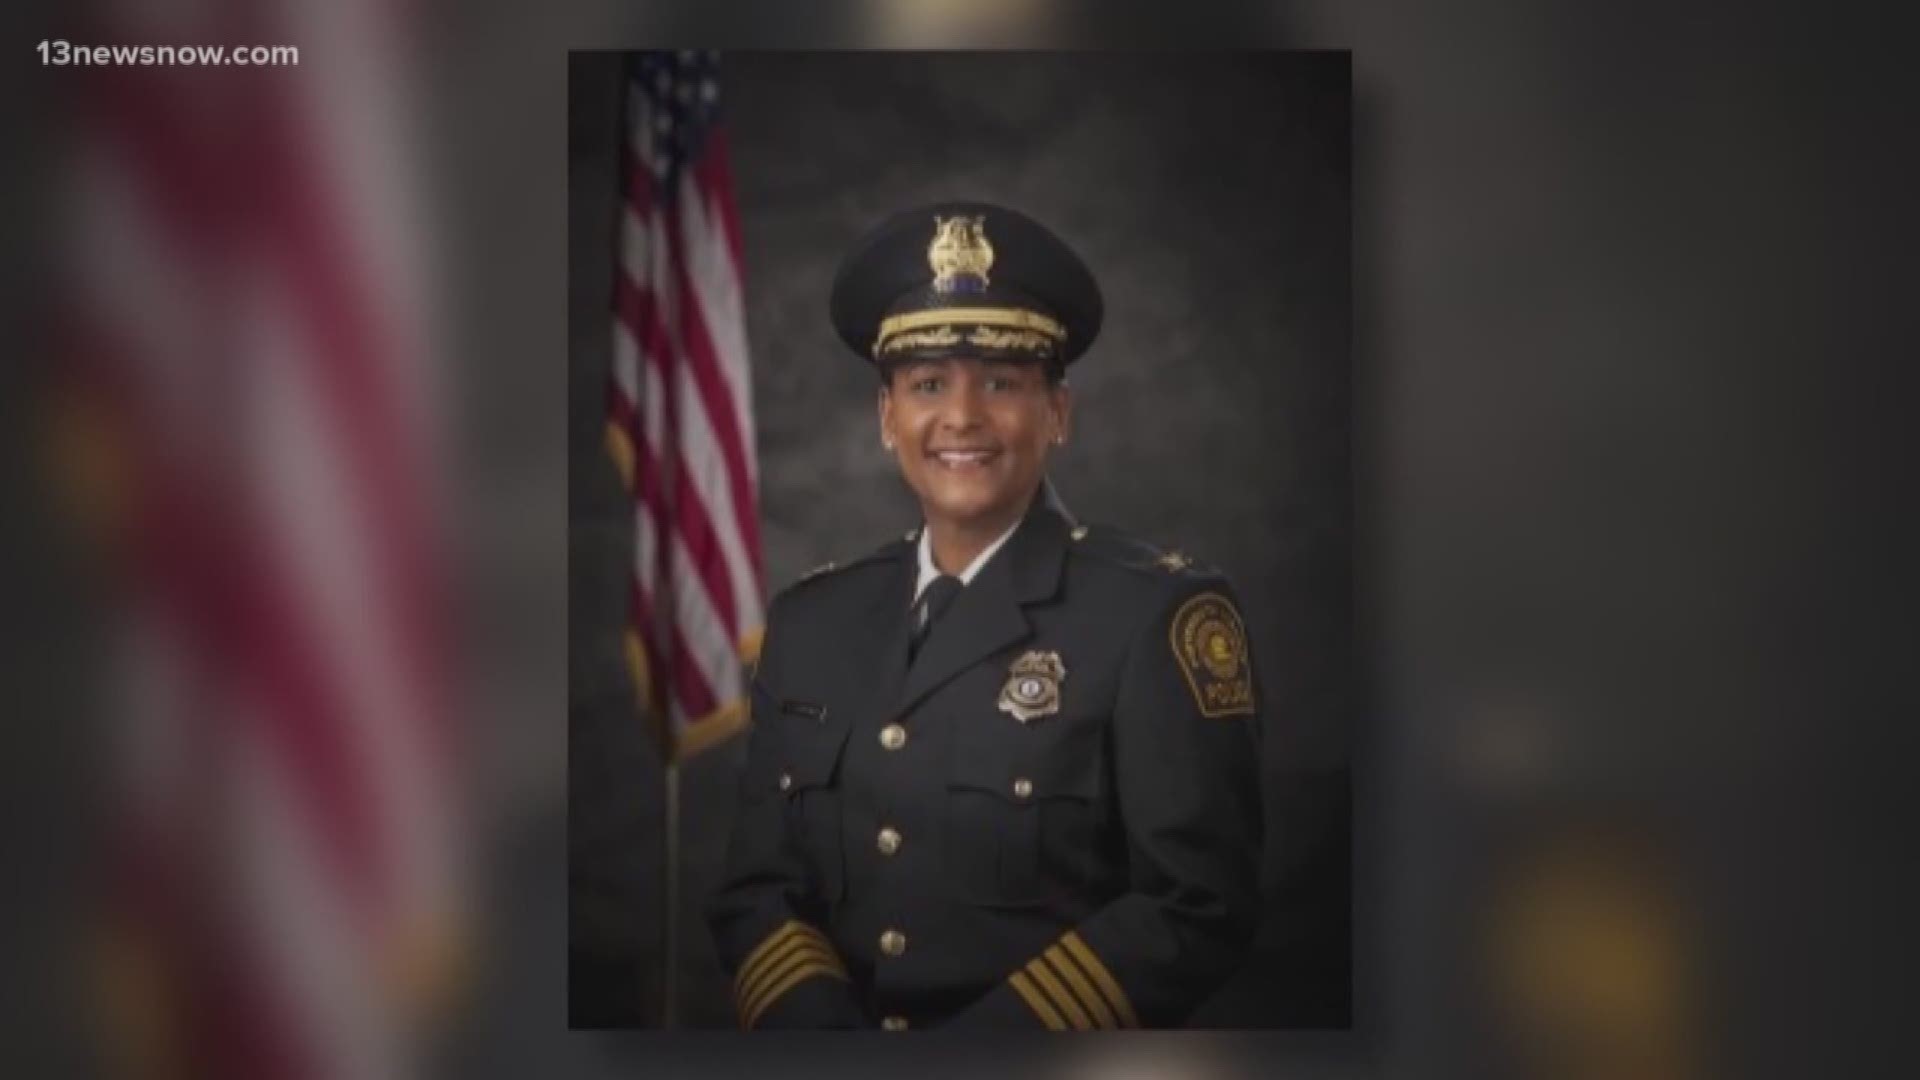 Tonya Chapman, the former police chief of The Portsmouth Police Department said she was forced out and the city manager gave her a pre-written letter.